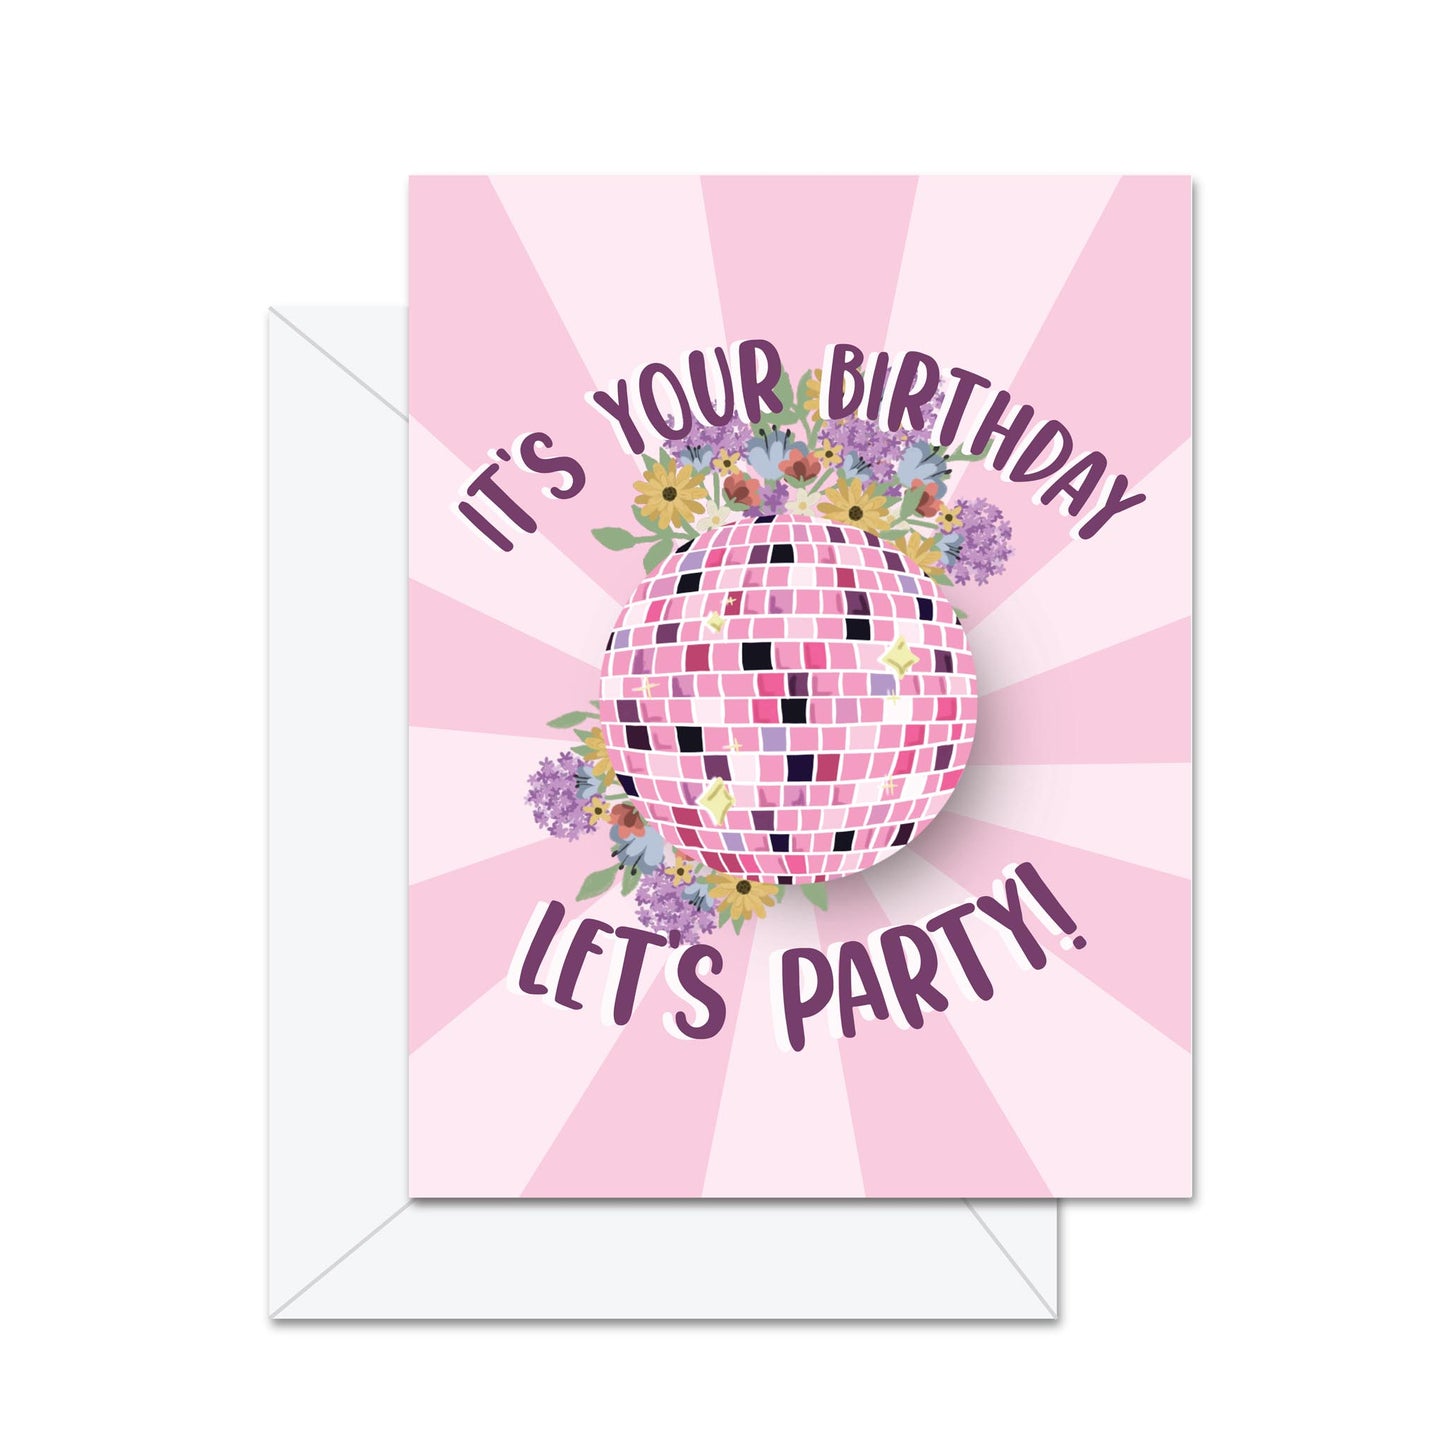 It's Your Birthday! Let's Party! - Greeting Card